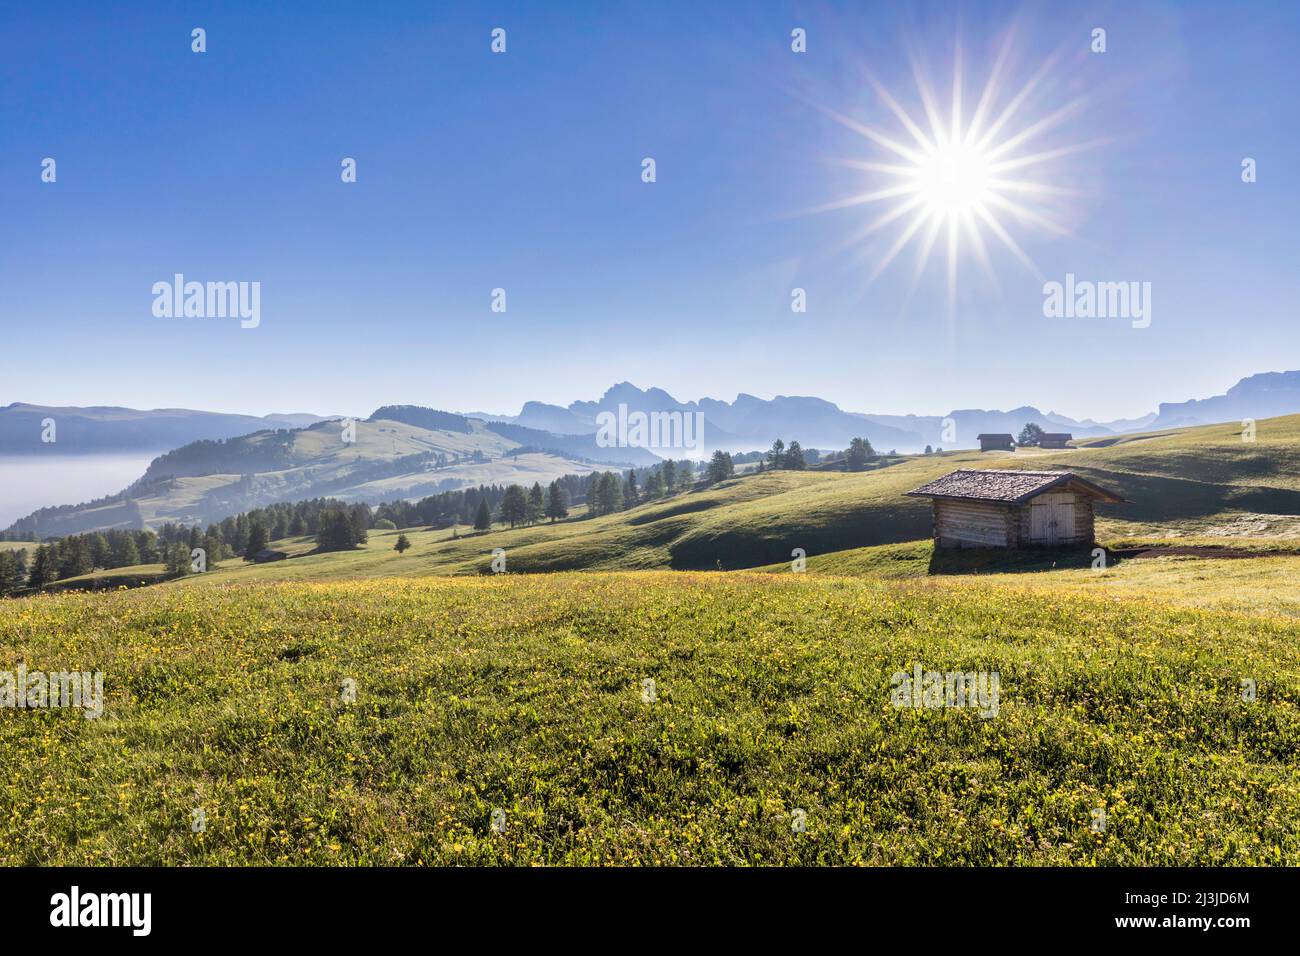 Italy, South Tyrol / Südtirol, Castelrotto / Kastelruth, Alpe di Siusi / Seiser alm - extended green pastures and characteristic wooden huts on the plateau Stock Photo